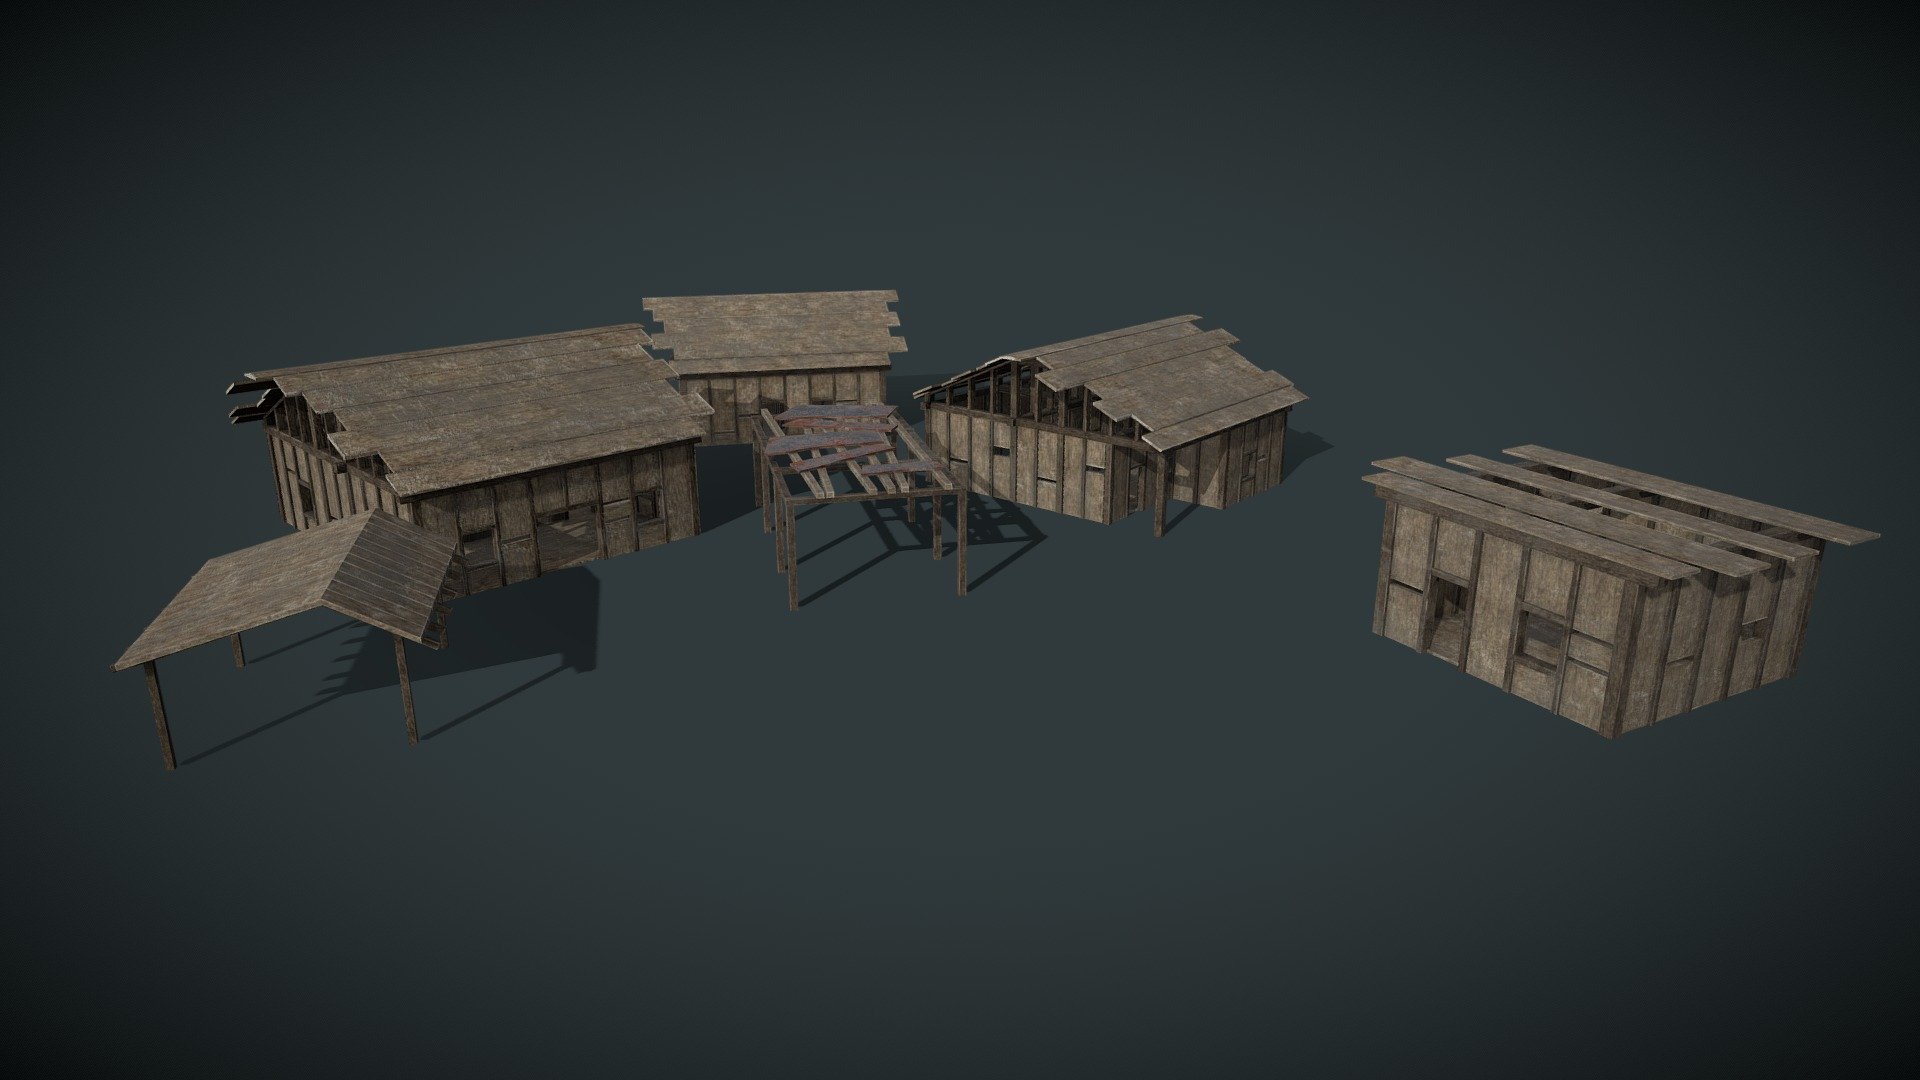 Some house variations from my old maps. 
Wooden forest house variations can be used to populate forests or you 
can dismantle and rearrange them in blender 3d model